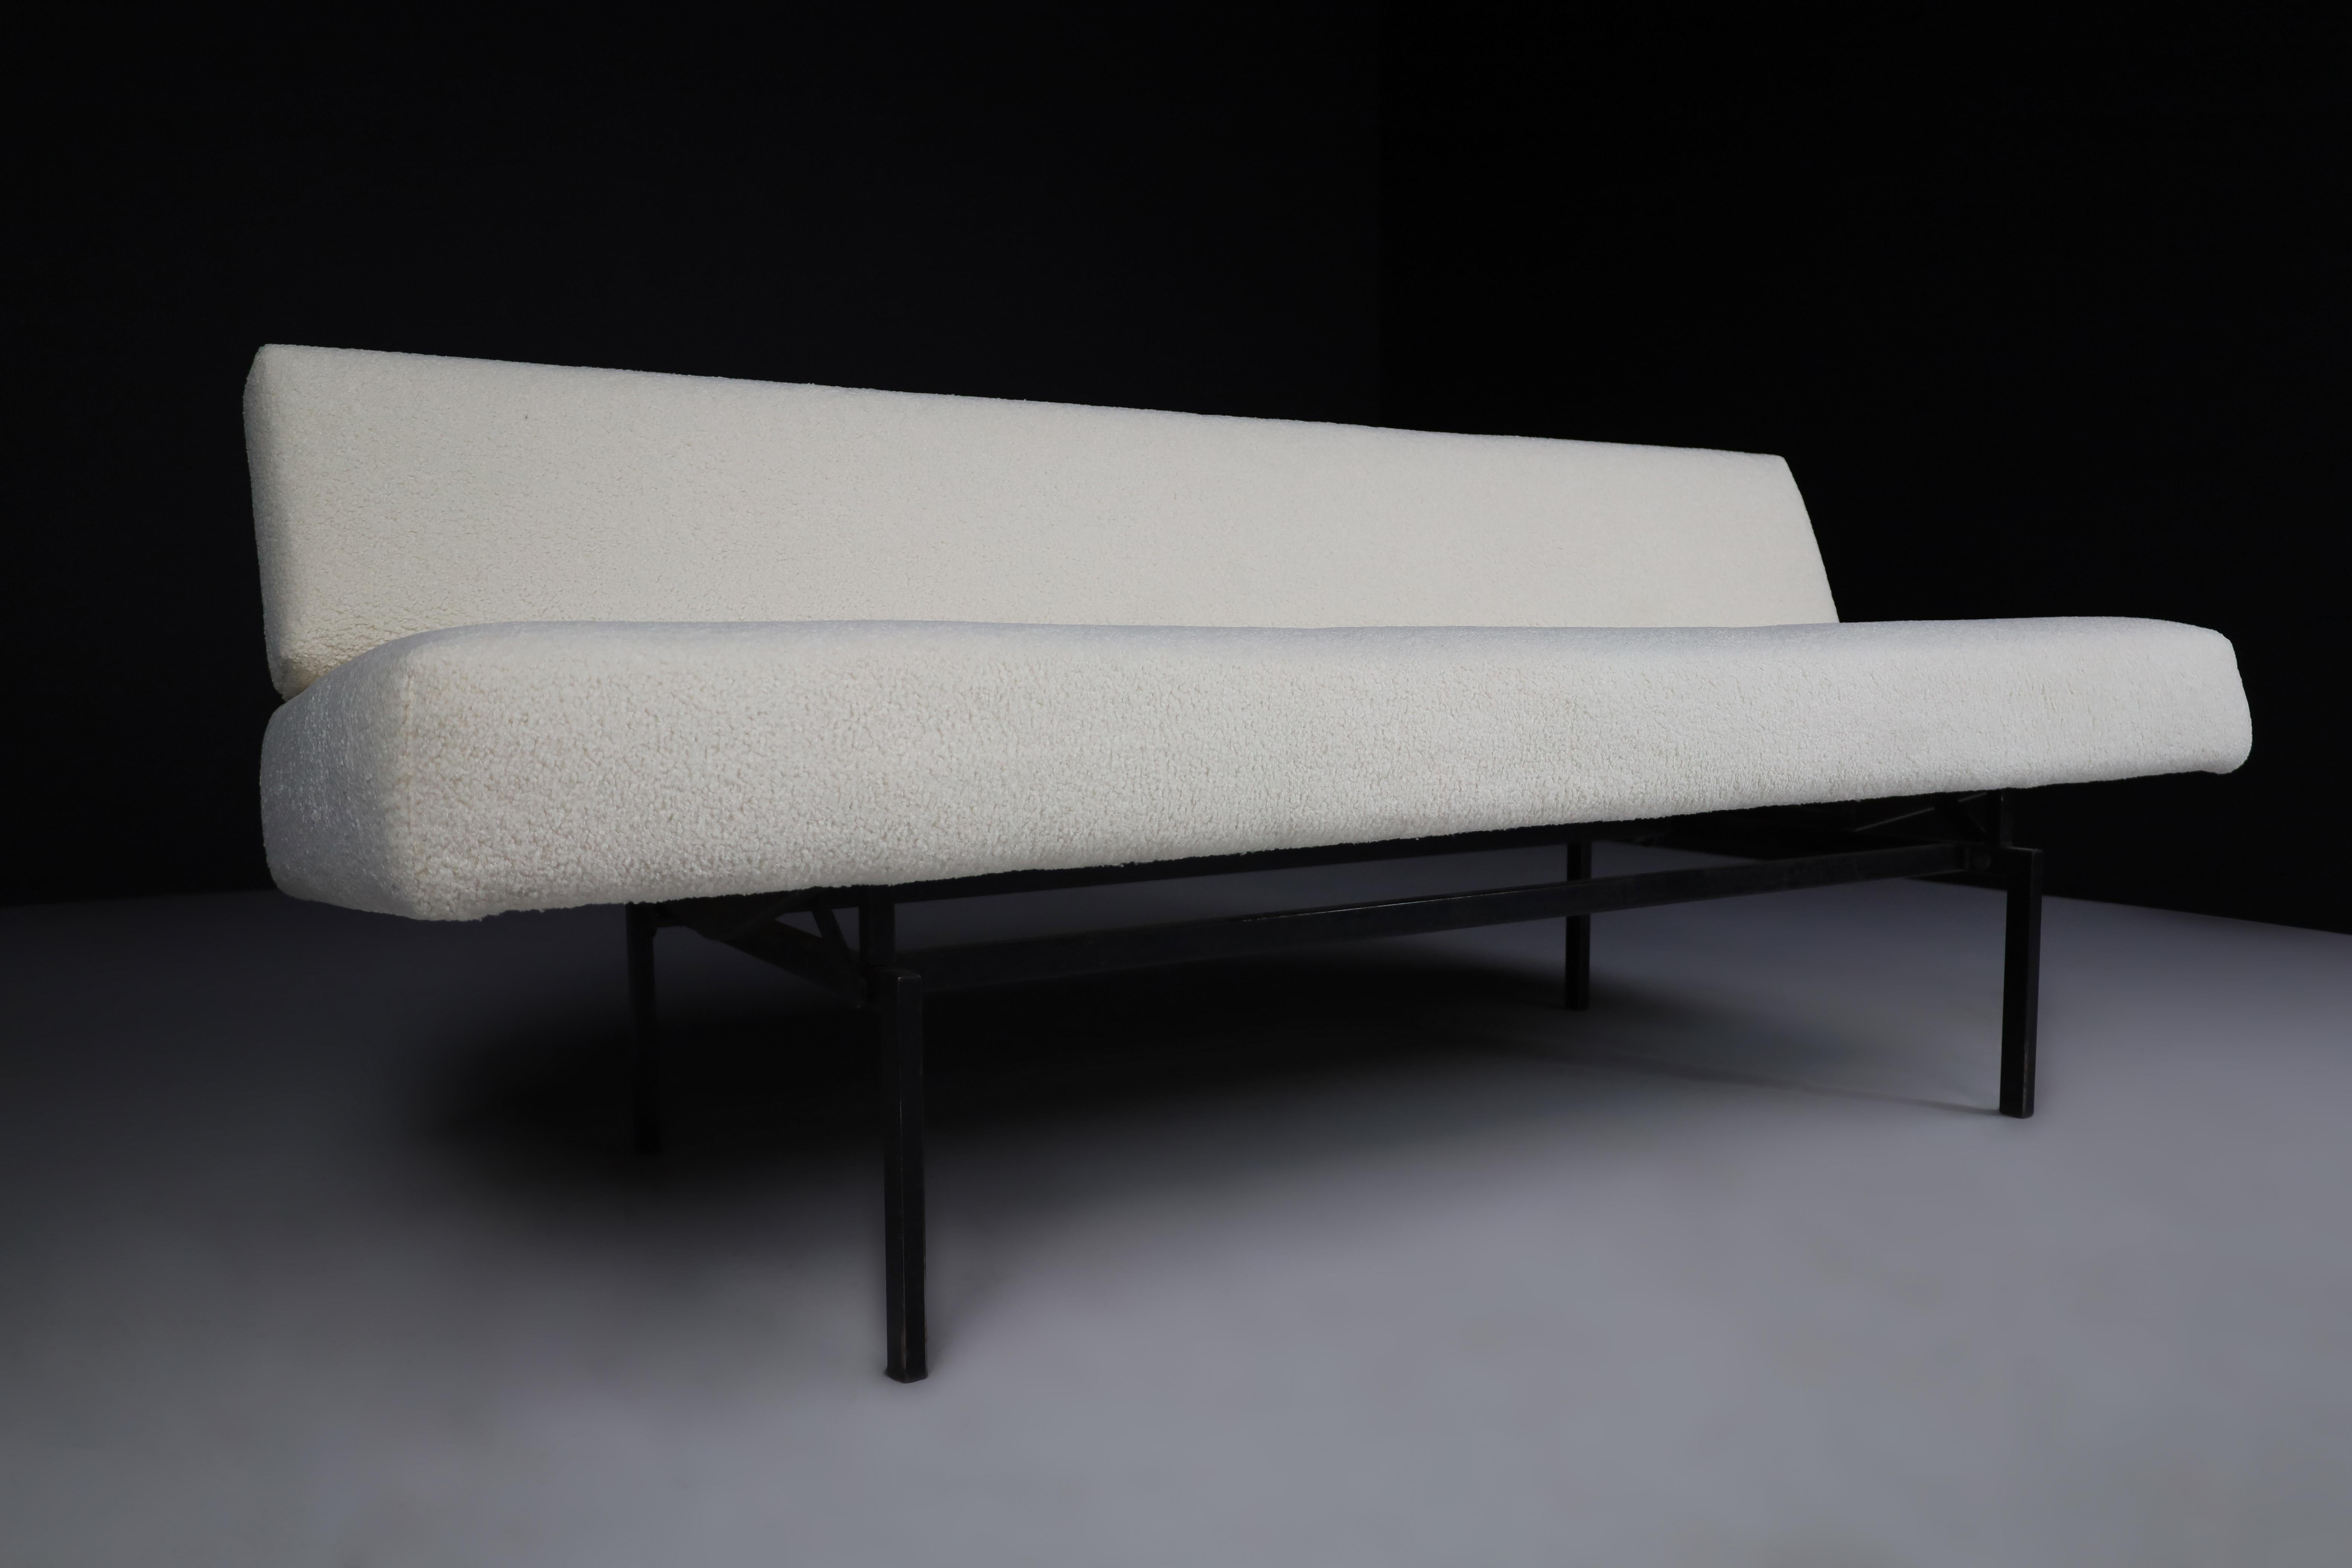 Metal Martin Visser Sofa or Sleeper Sofa for 't Spectrum in New Teddy Fabric, 1960s For Sale